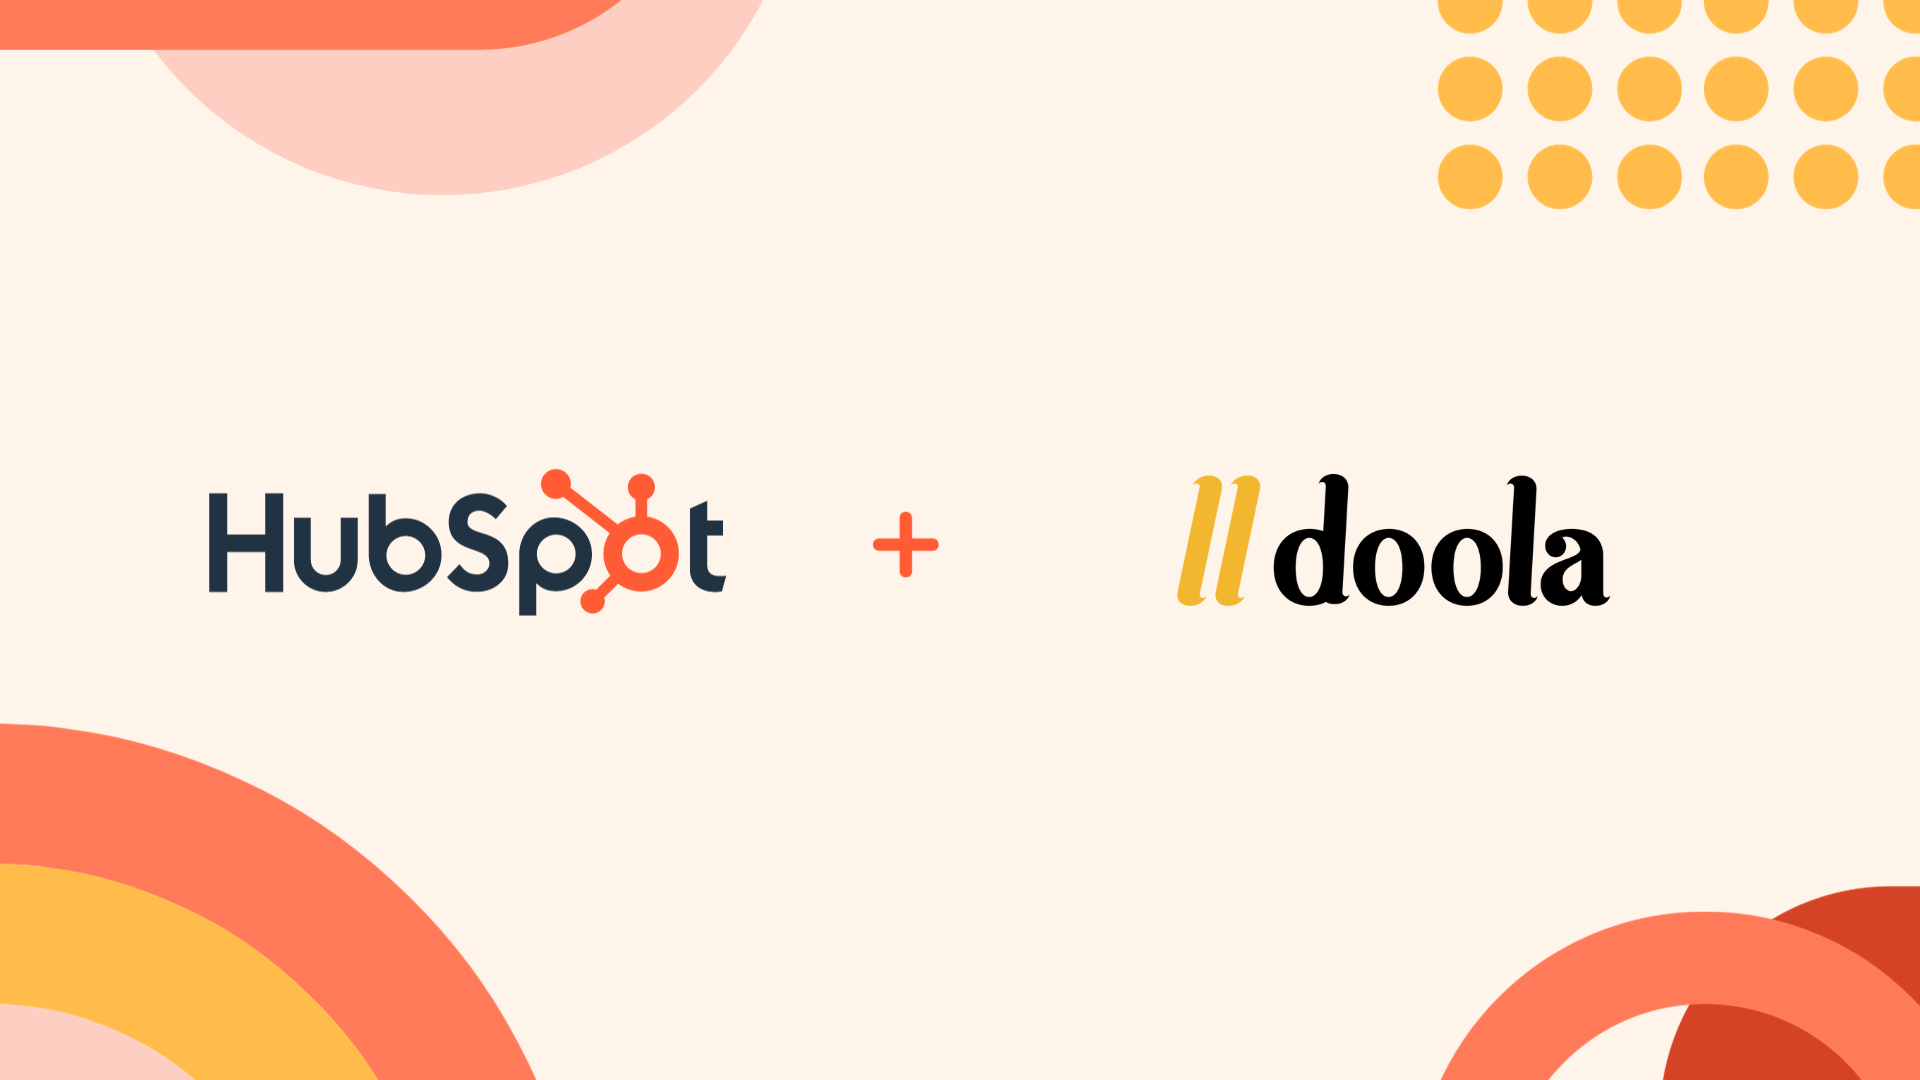 Supporting the Next Generation of Business Builders: HubSpot Ventures invests in doola